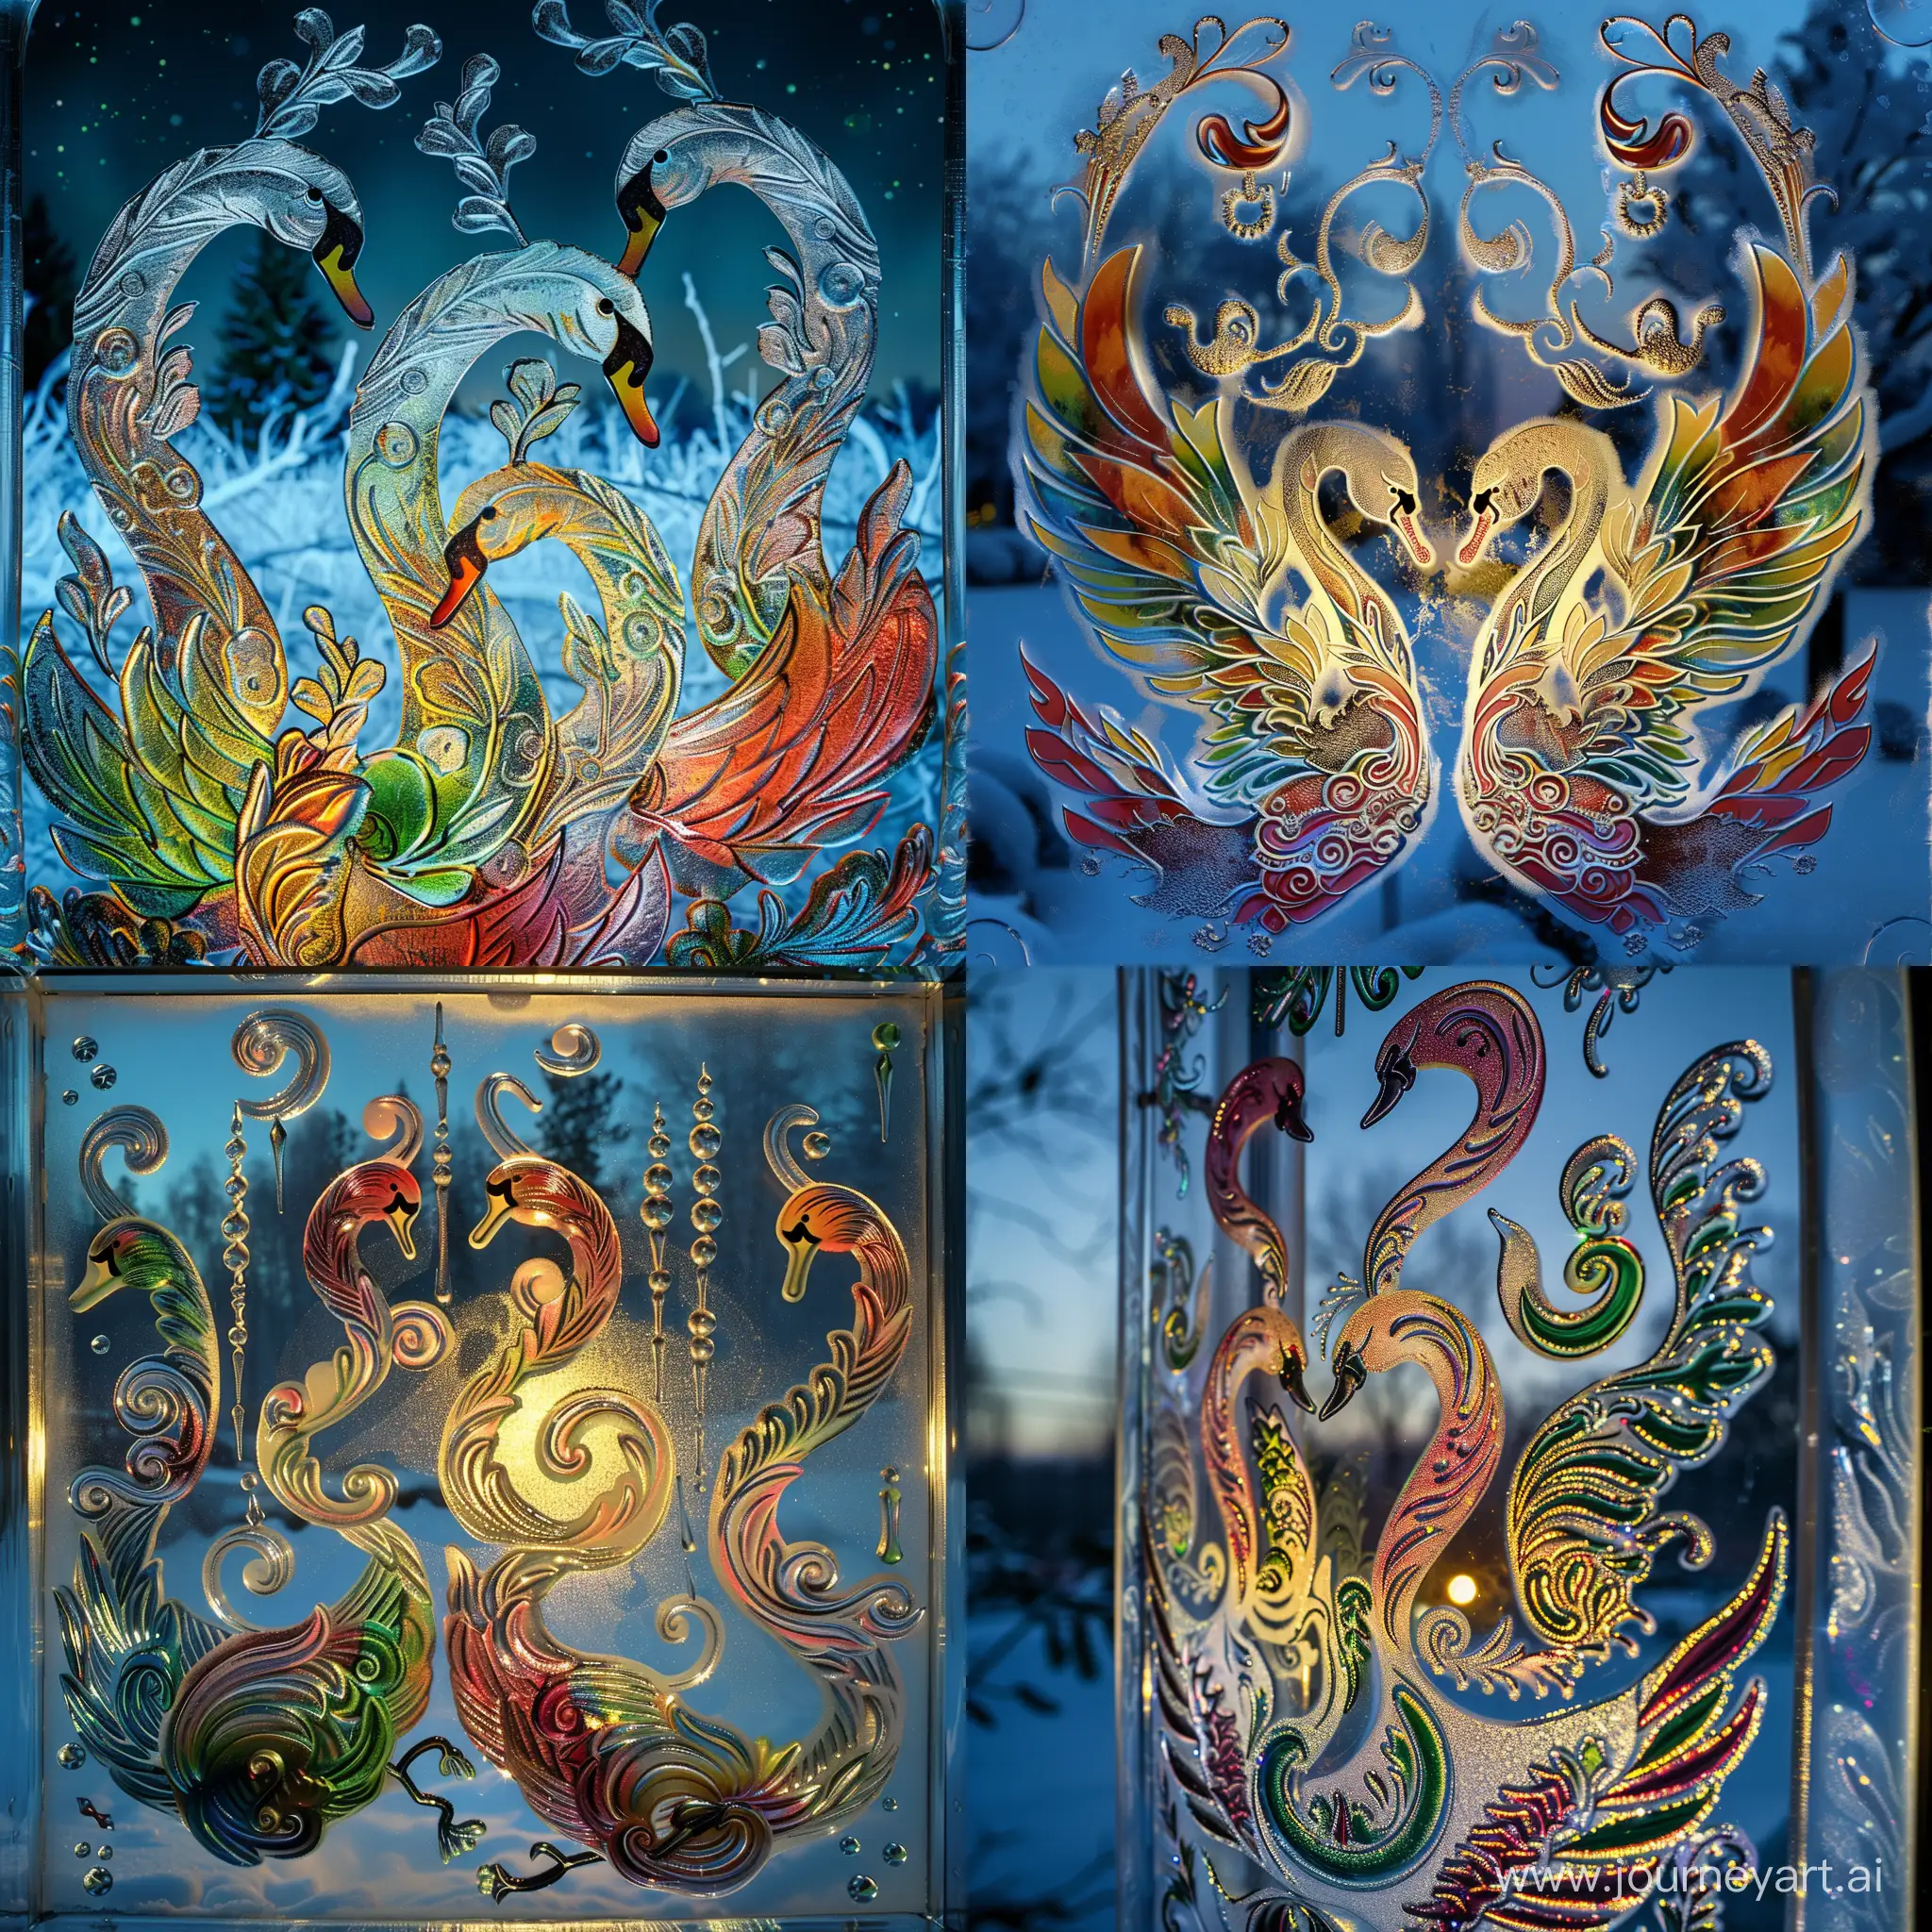 Enchanting-Frosted-Glass-Window-with-Colorful-Swan-Patterns-in-Winter-Night-Sky